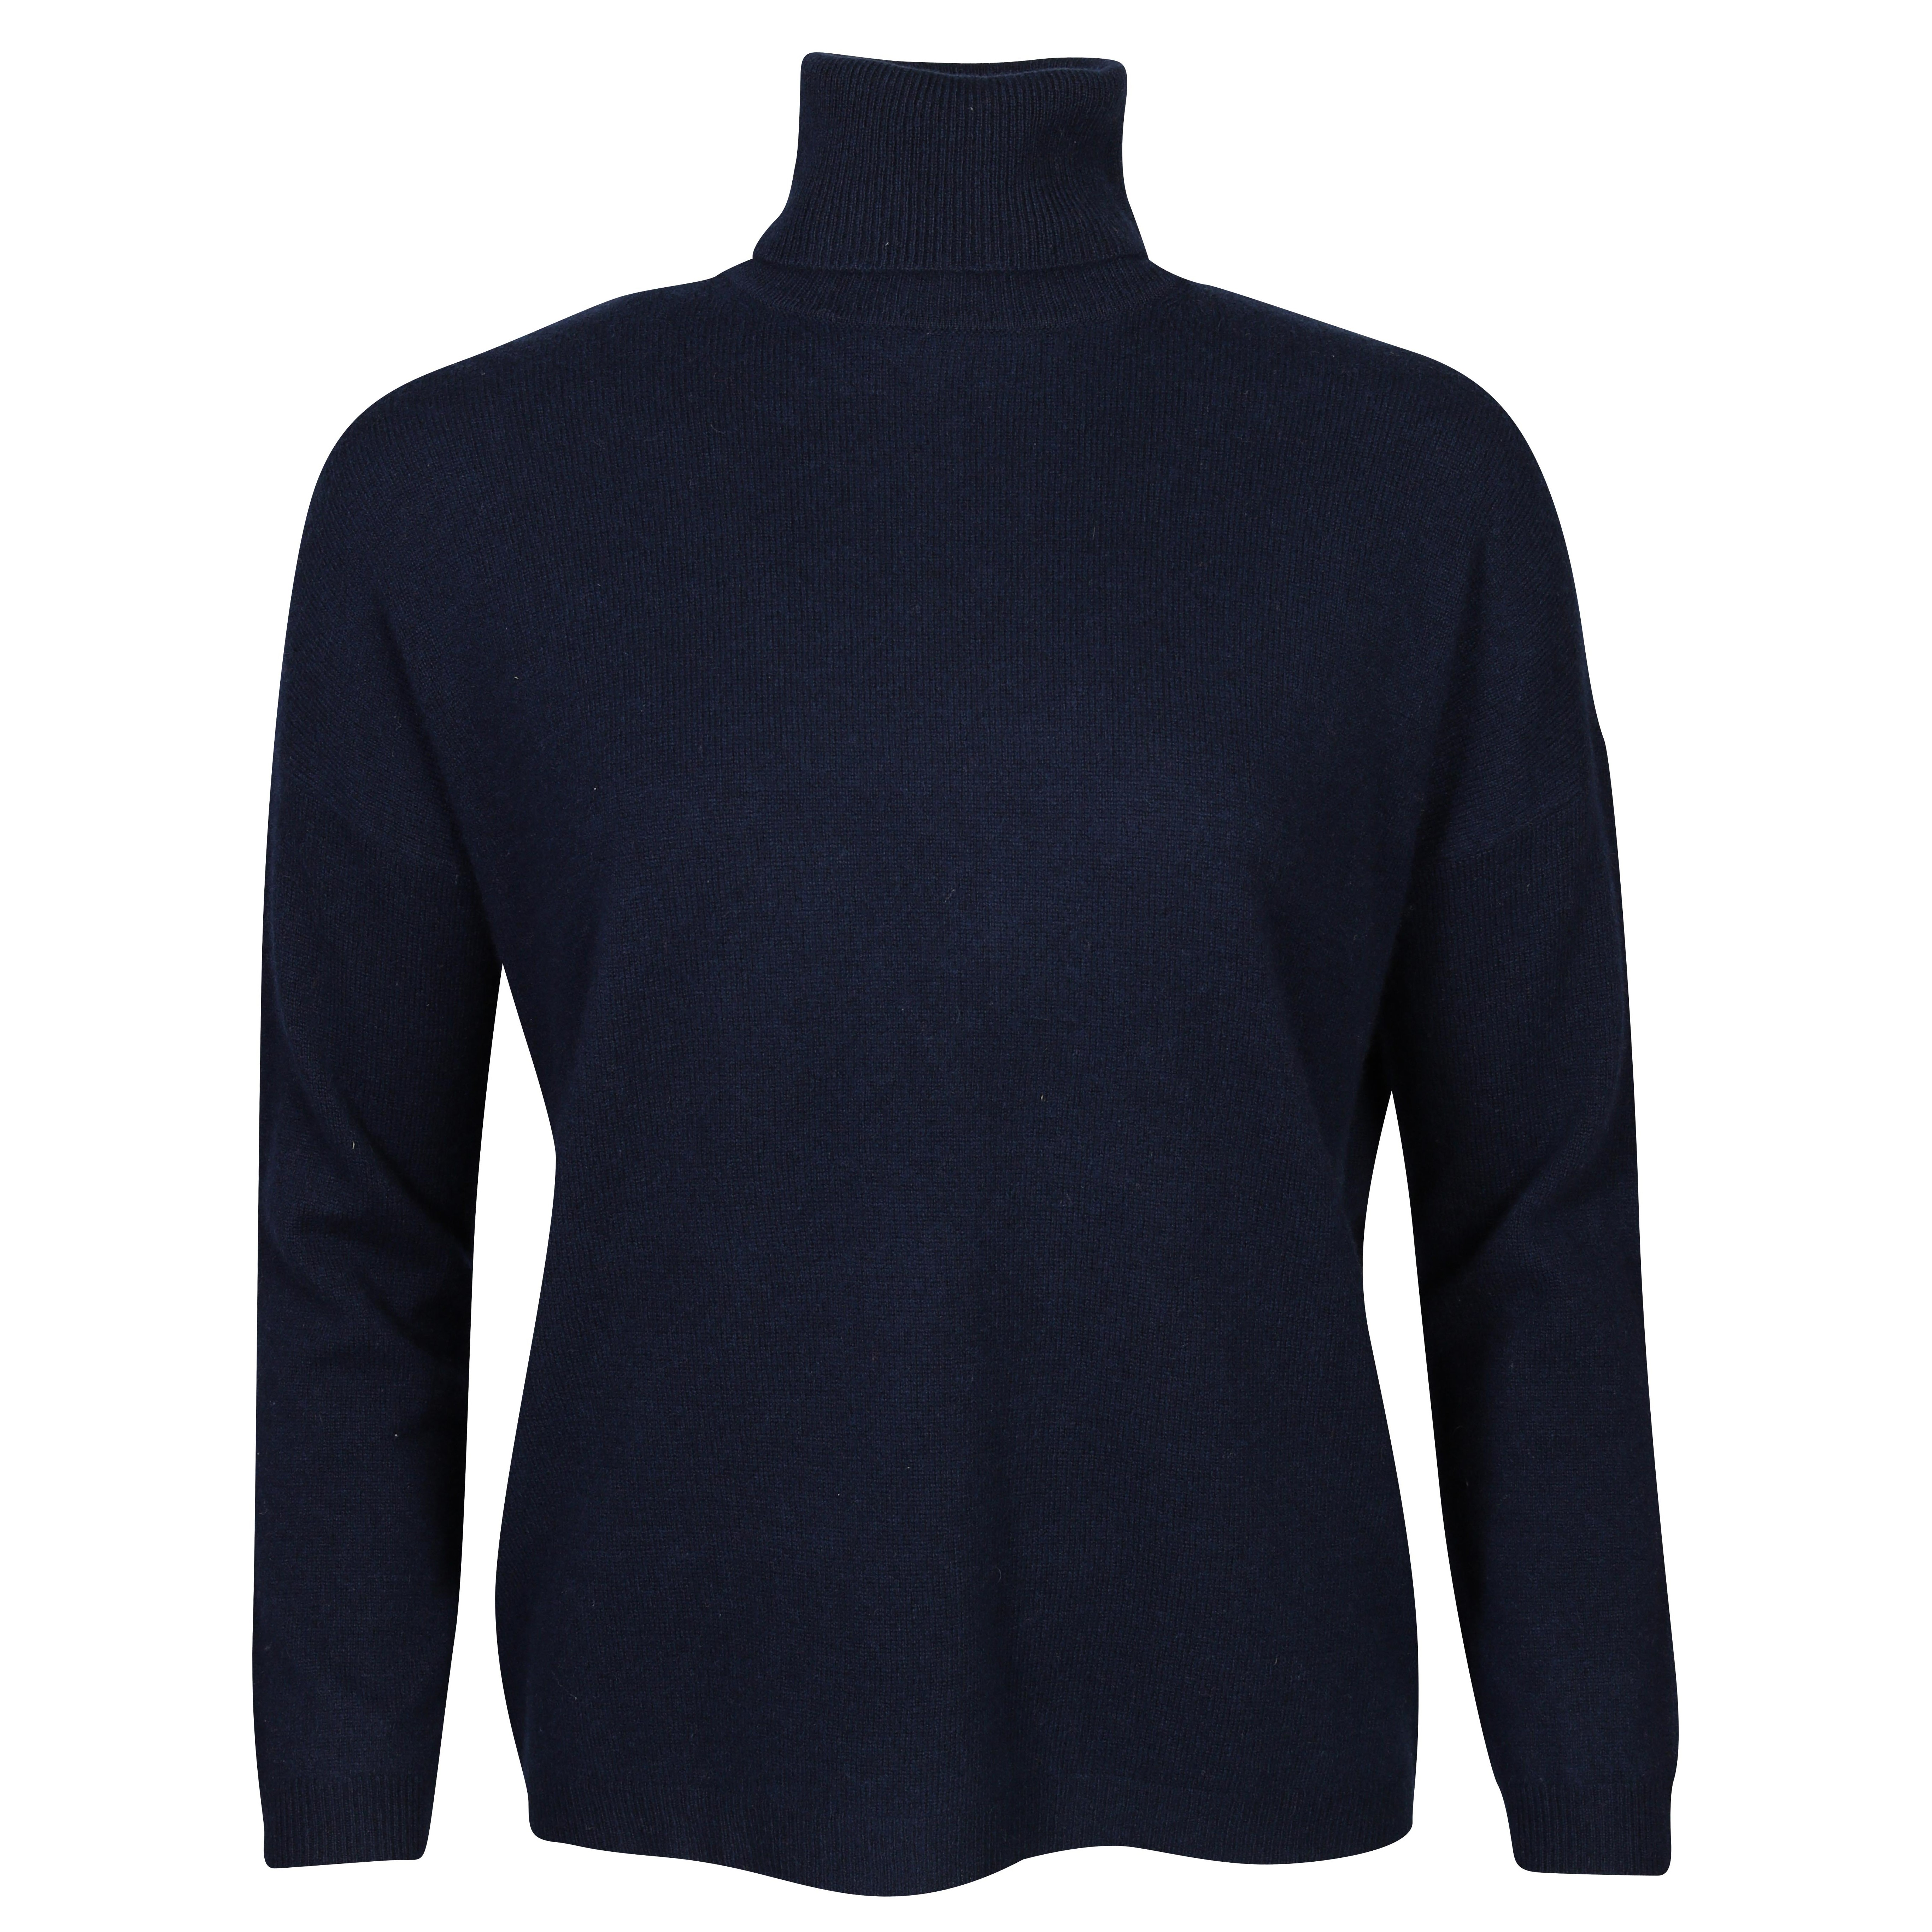 Absolut Cashmere Ambre Turtle Neck in Nuit XS